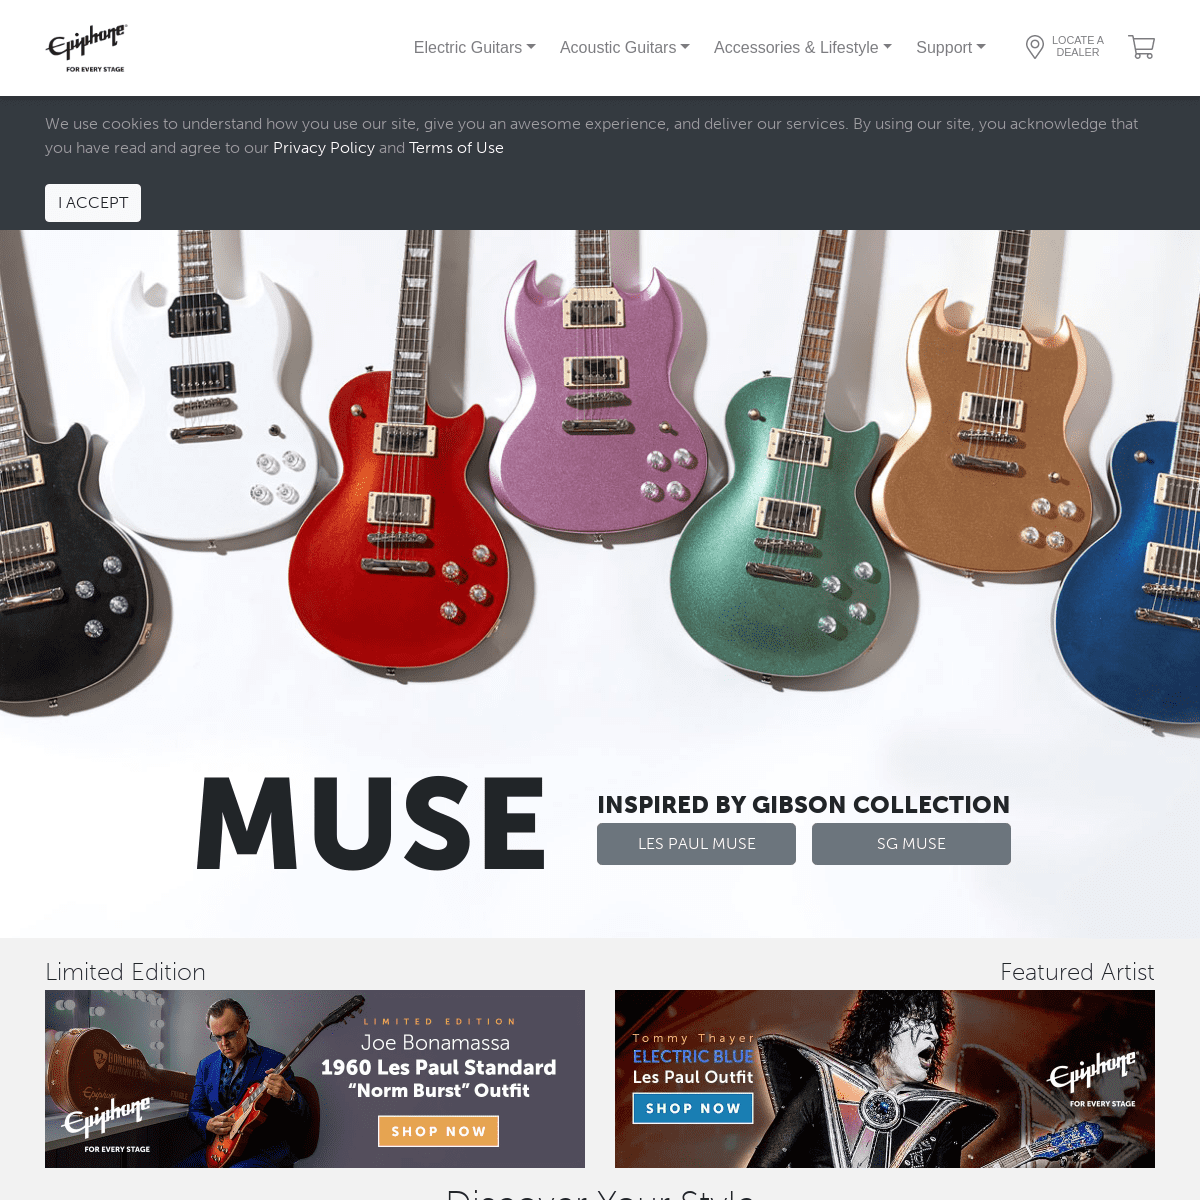 A complete backup of epiphone.com